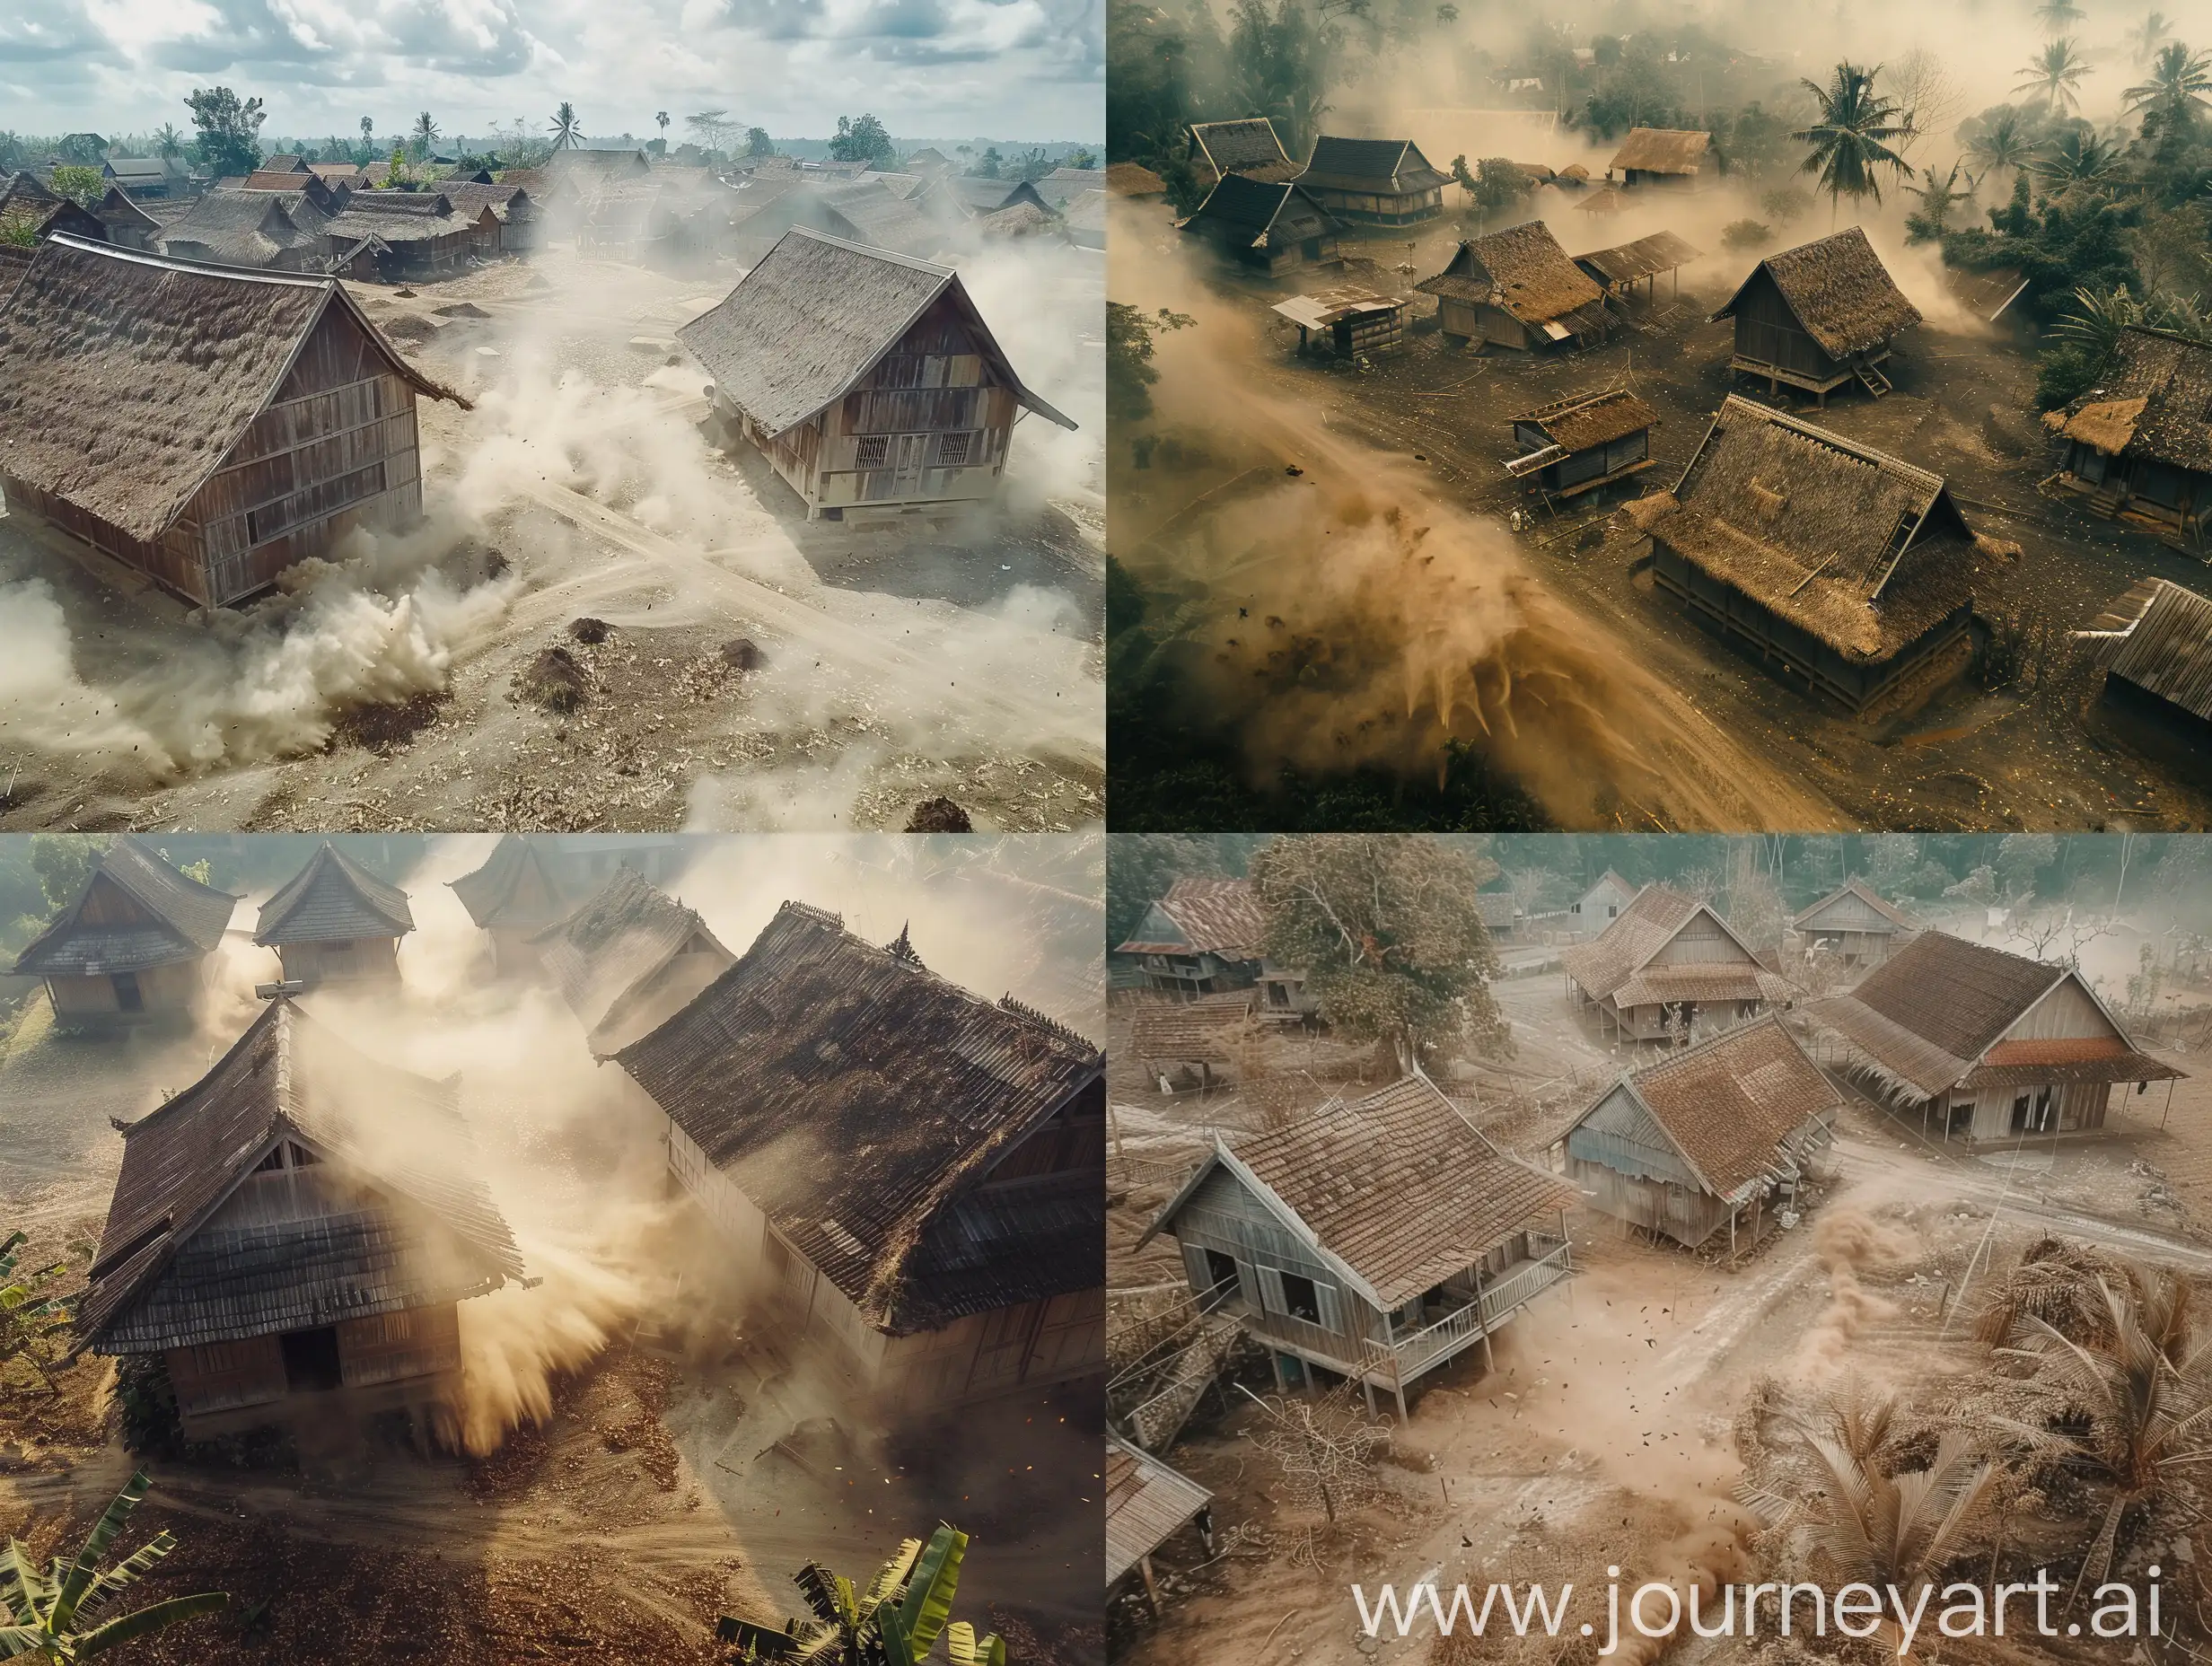 cinematic film, drone view, Indonesian village in the royal year, you can see several simple wooden houses. The wind is blowing hard, spreading dust and leaves 16:9